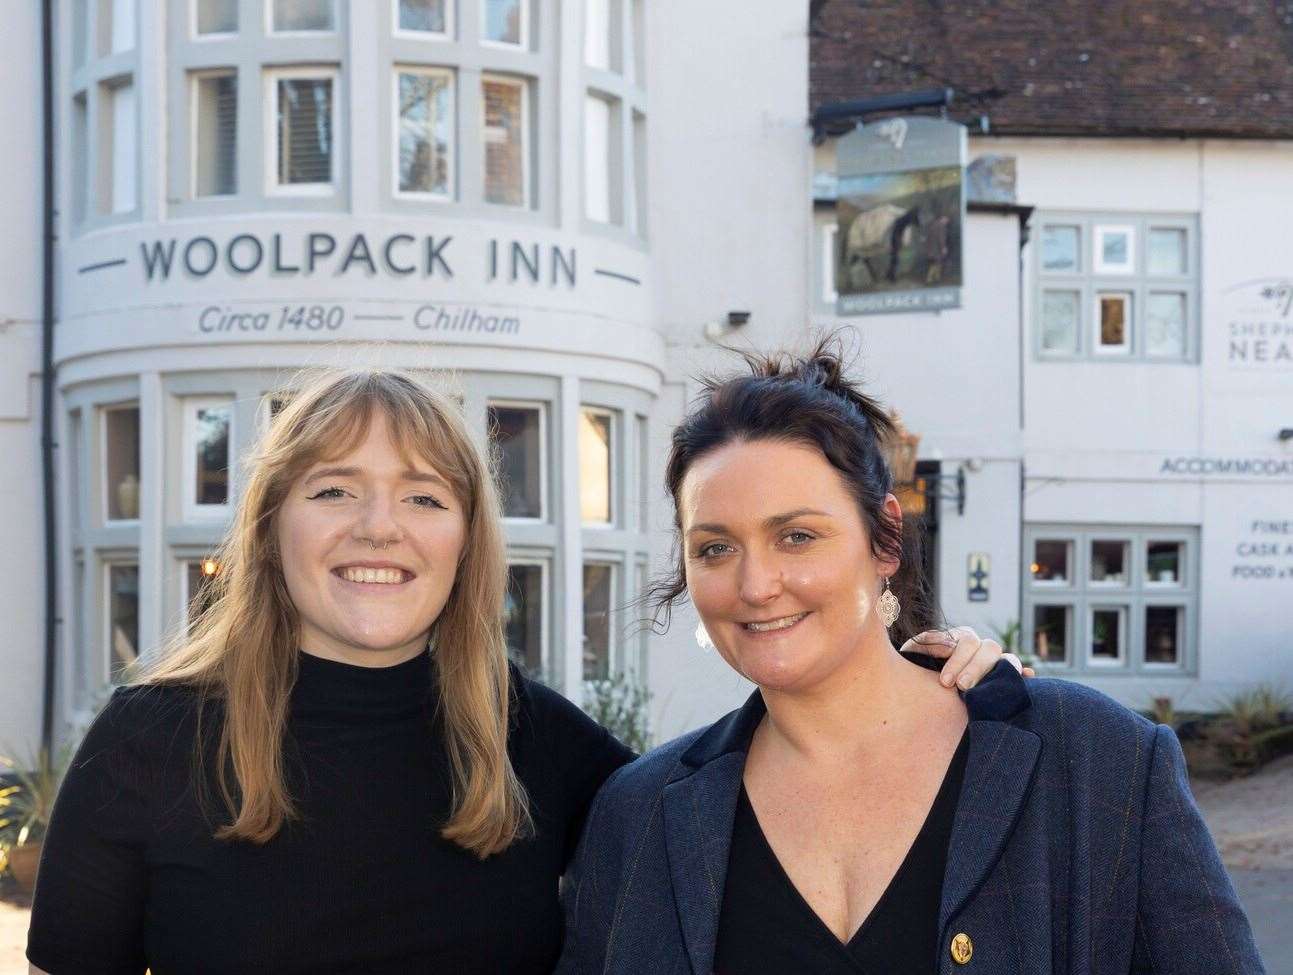 Sisters Leanne Cogger and Molly Thompson will be running the Woolpack Inn at Chilham